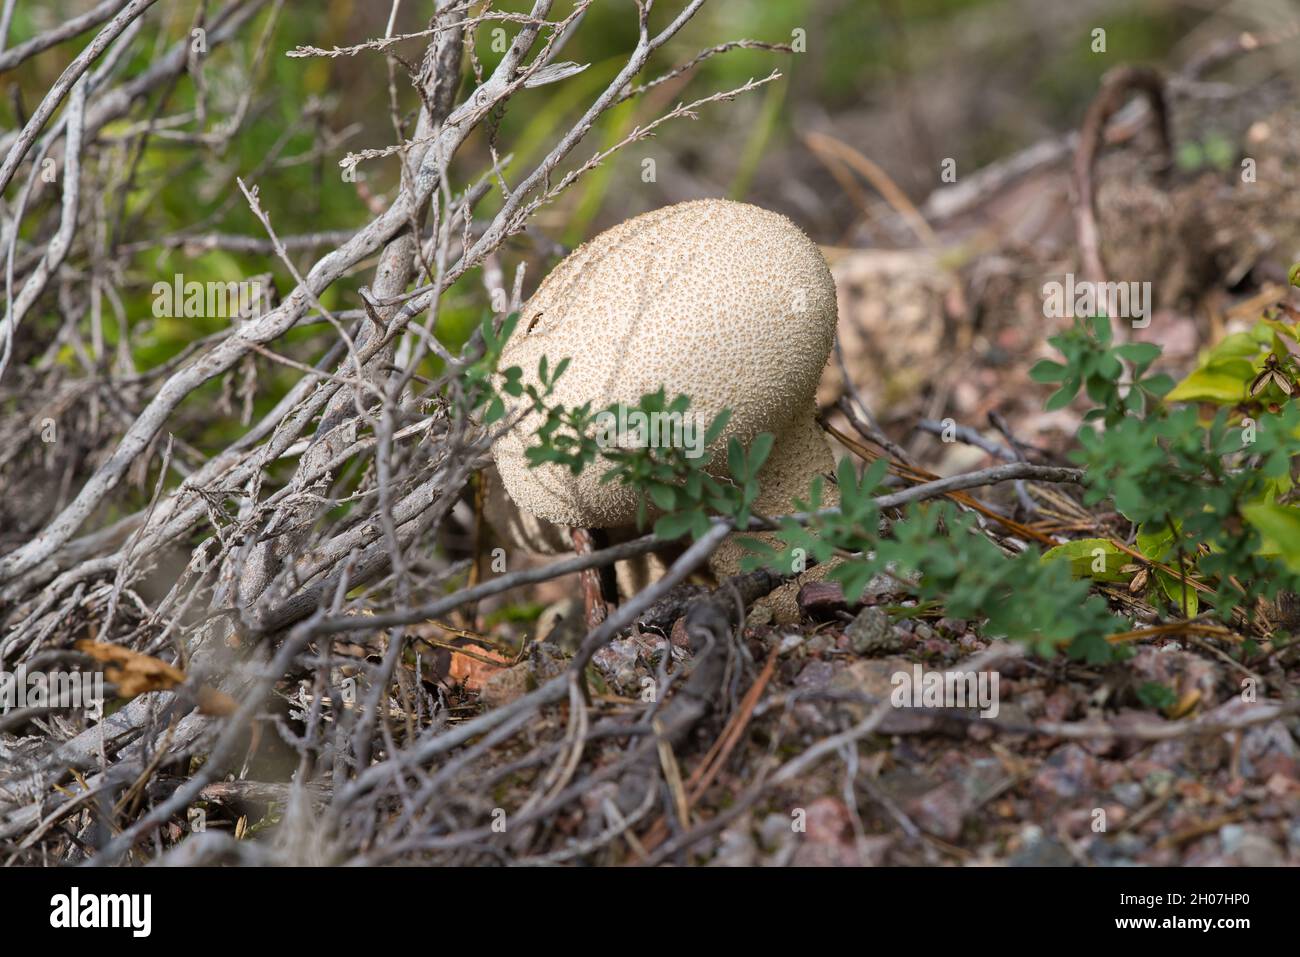 a Lycoperdon perlatum, popularly known as the common puffball, emerging from the forest ground Stock Photo